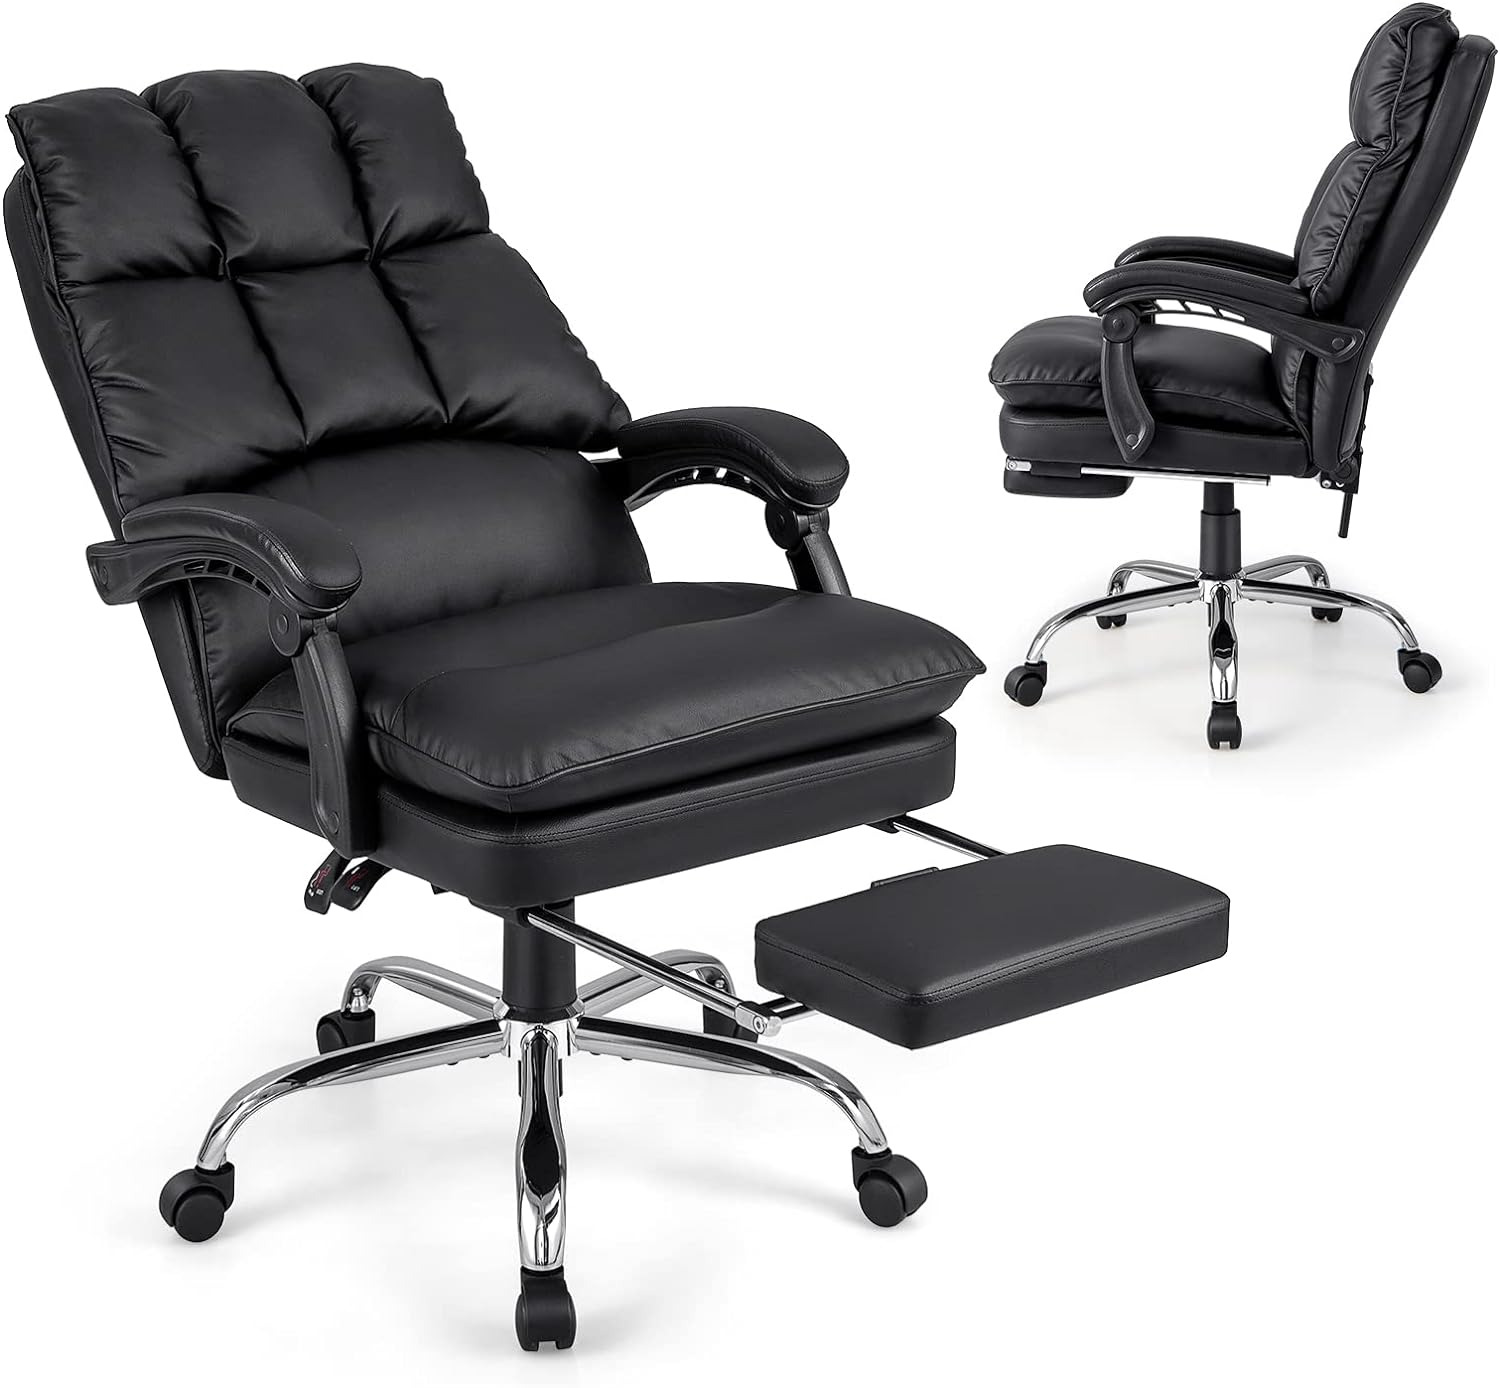 Giantex Executive Office Chair, PU Leather Reclining Chair with Retractable Foot